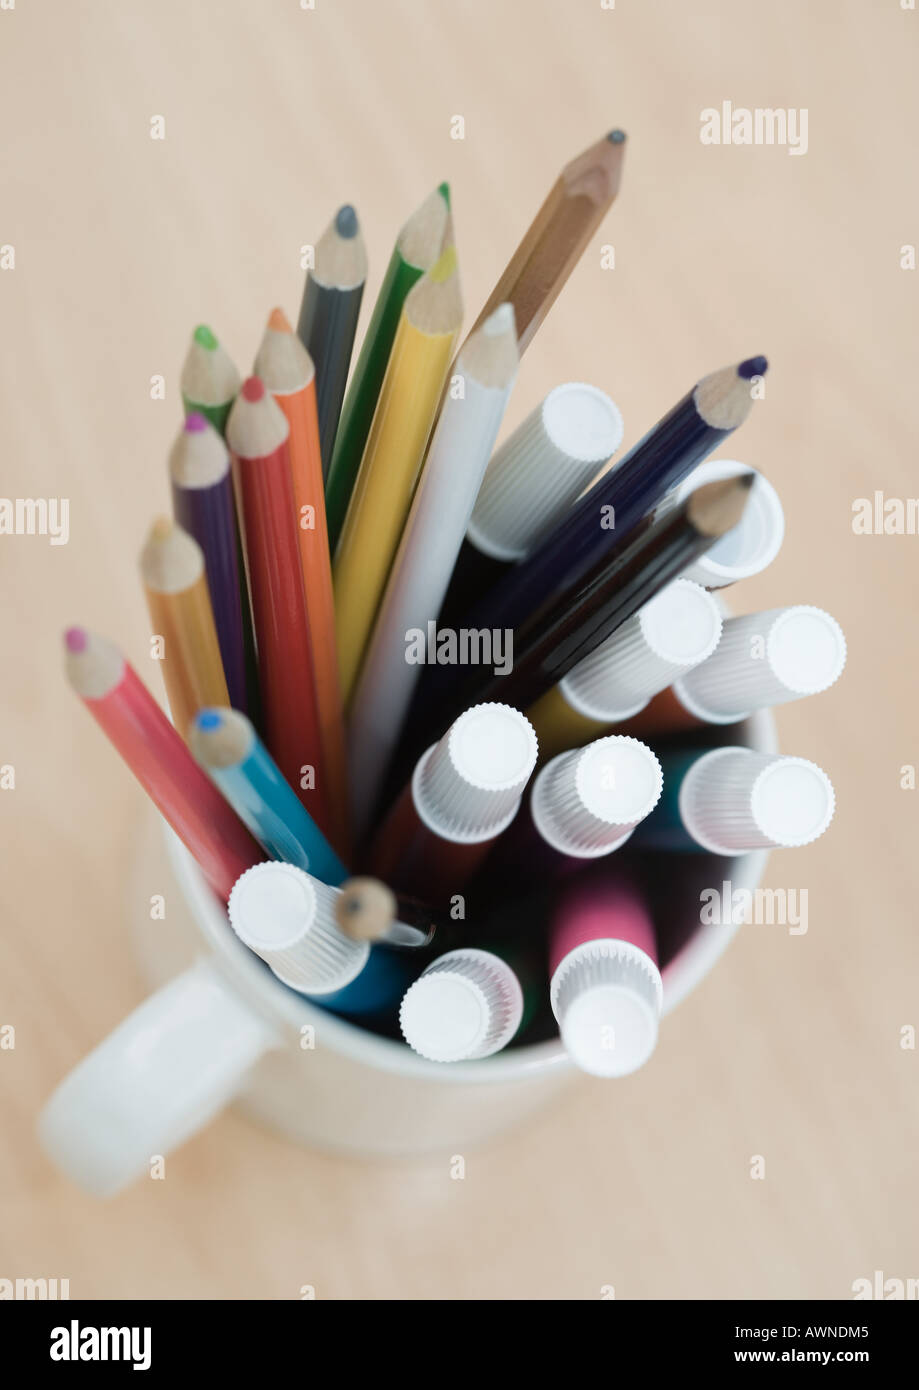 Mug full of colored pencils and markers, high angle view Stock Photo